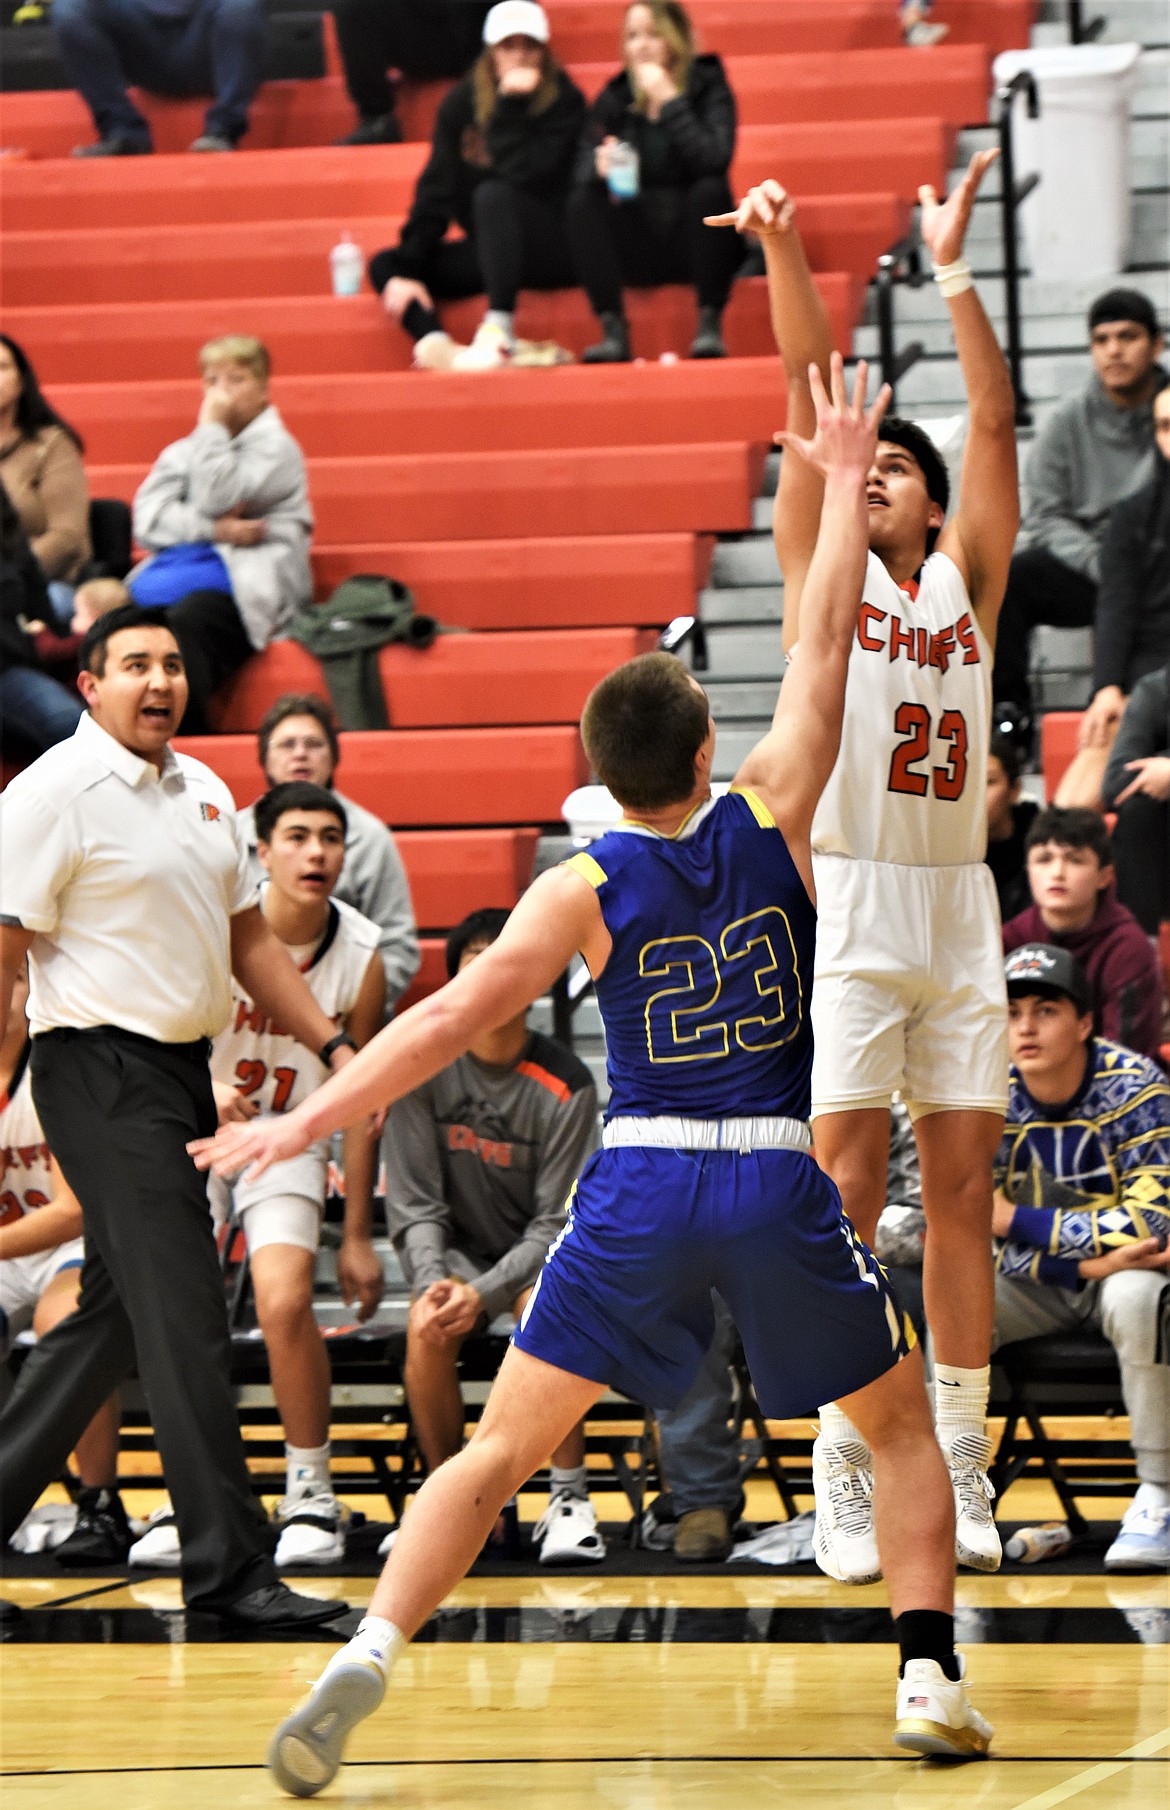 Elijah Tonasket puts up a 3-pointer against Libby in front of Ronan head coach DJ Fish. (Scot Heisel/Lake County Leader)